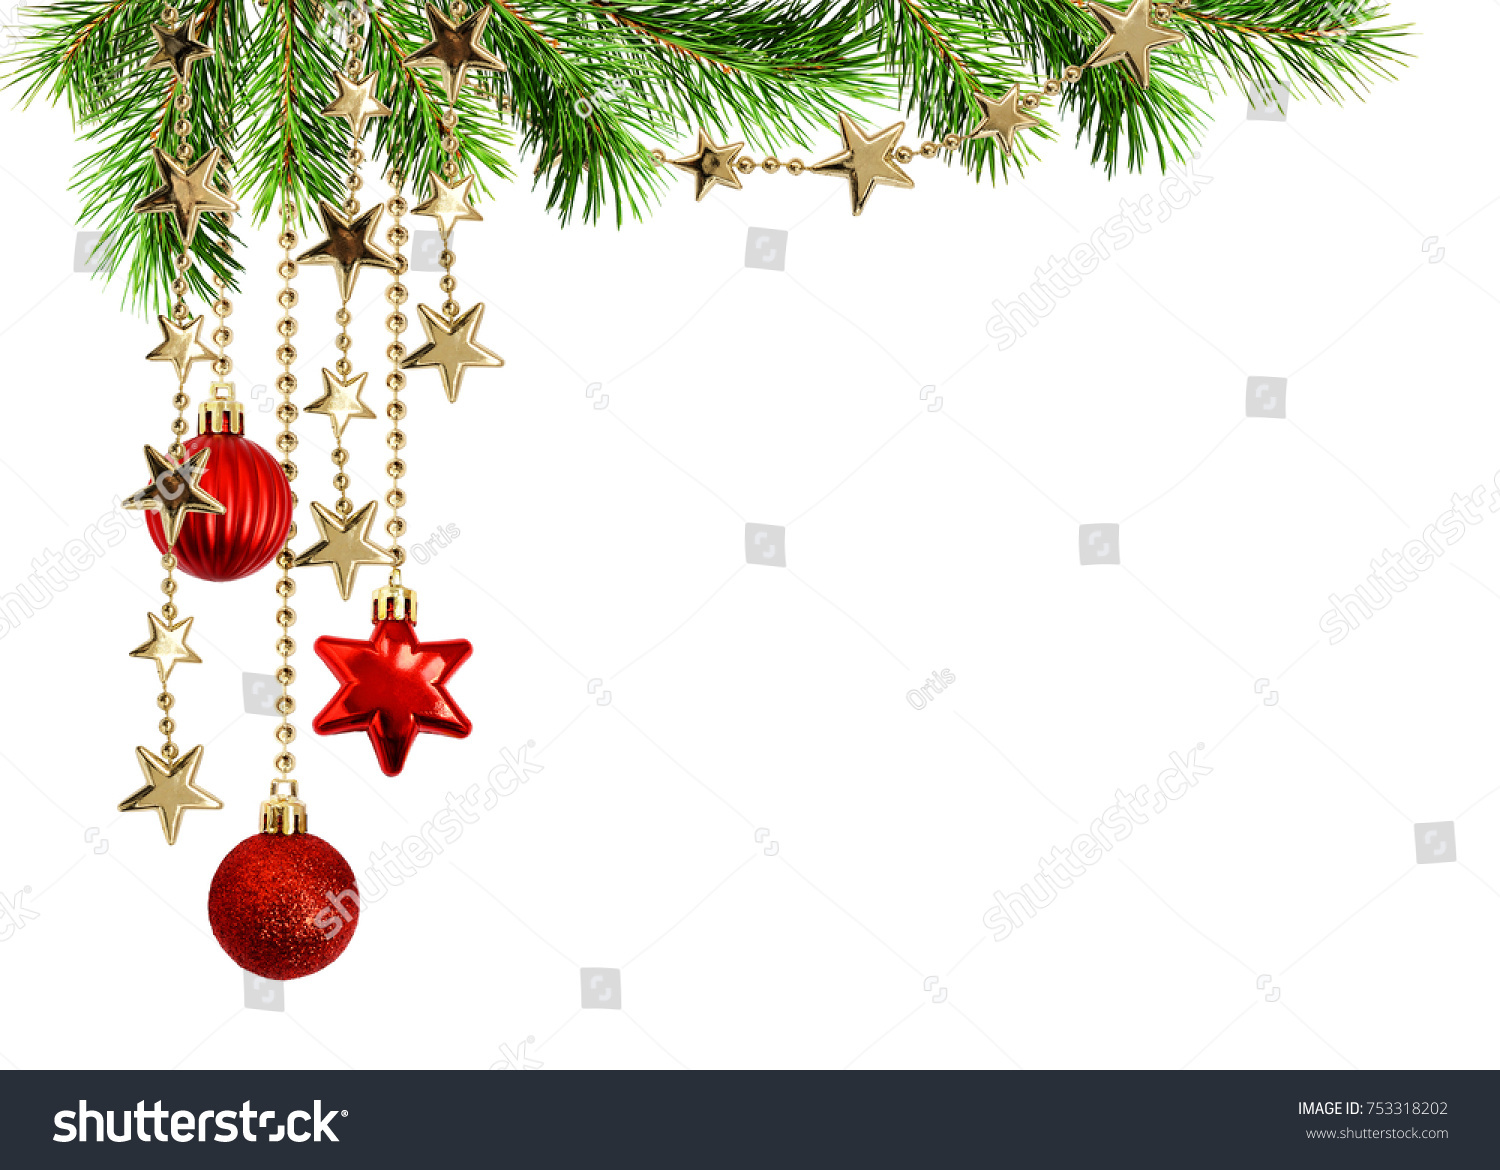 Christmas arrangement with green pine twigs and hanging red decorations isolated on white background #753318202